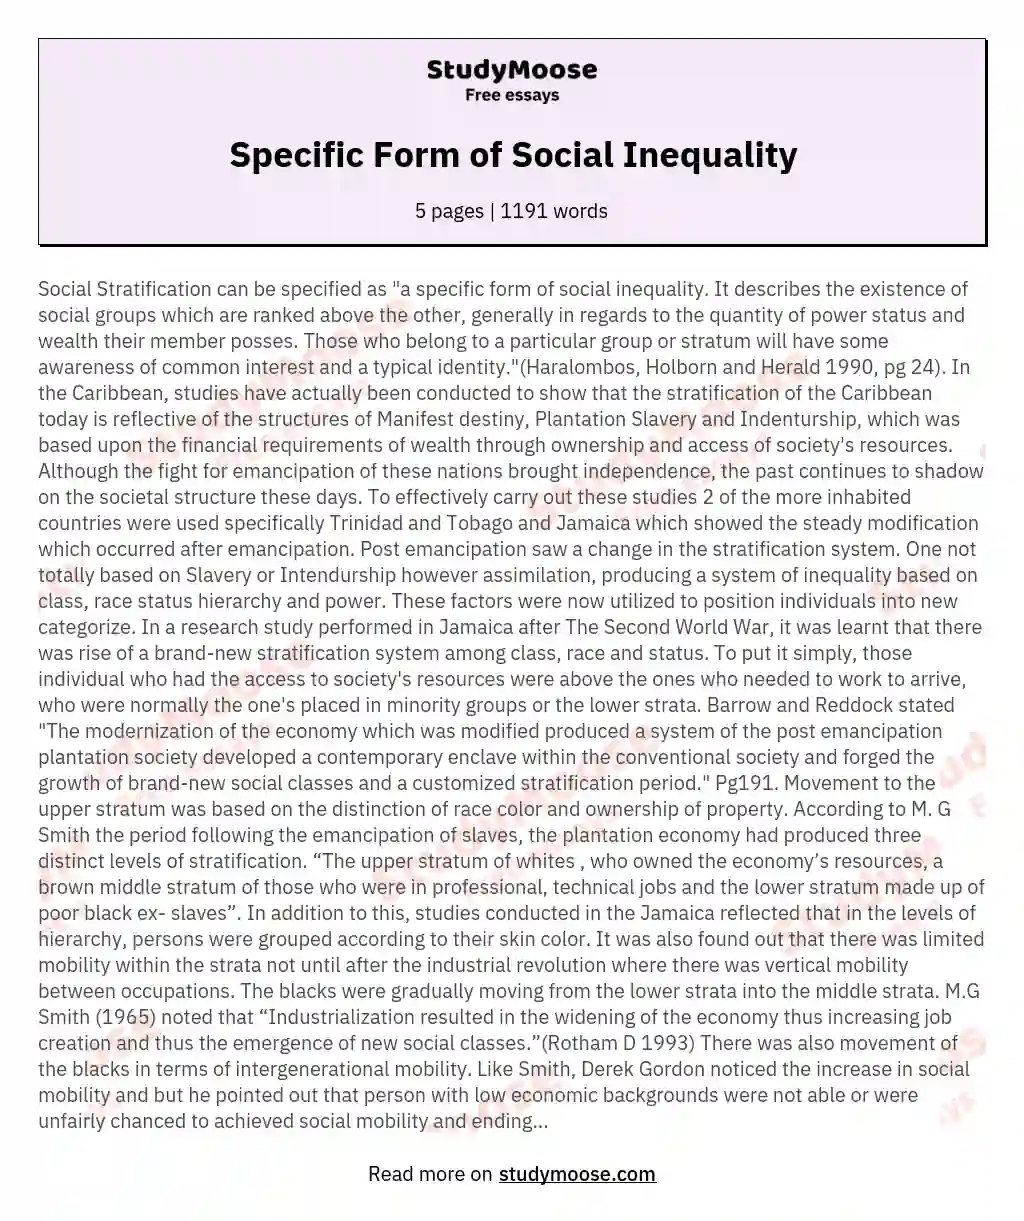 Specific Form of Social Inequality